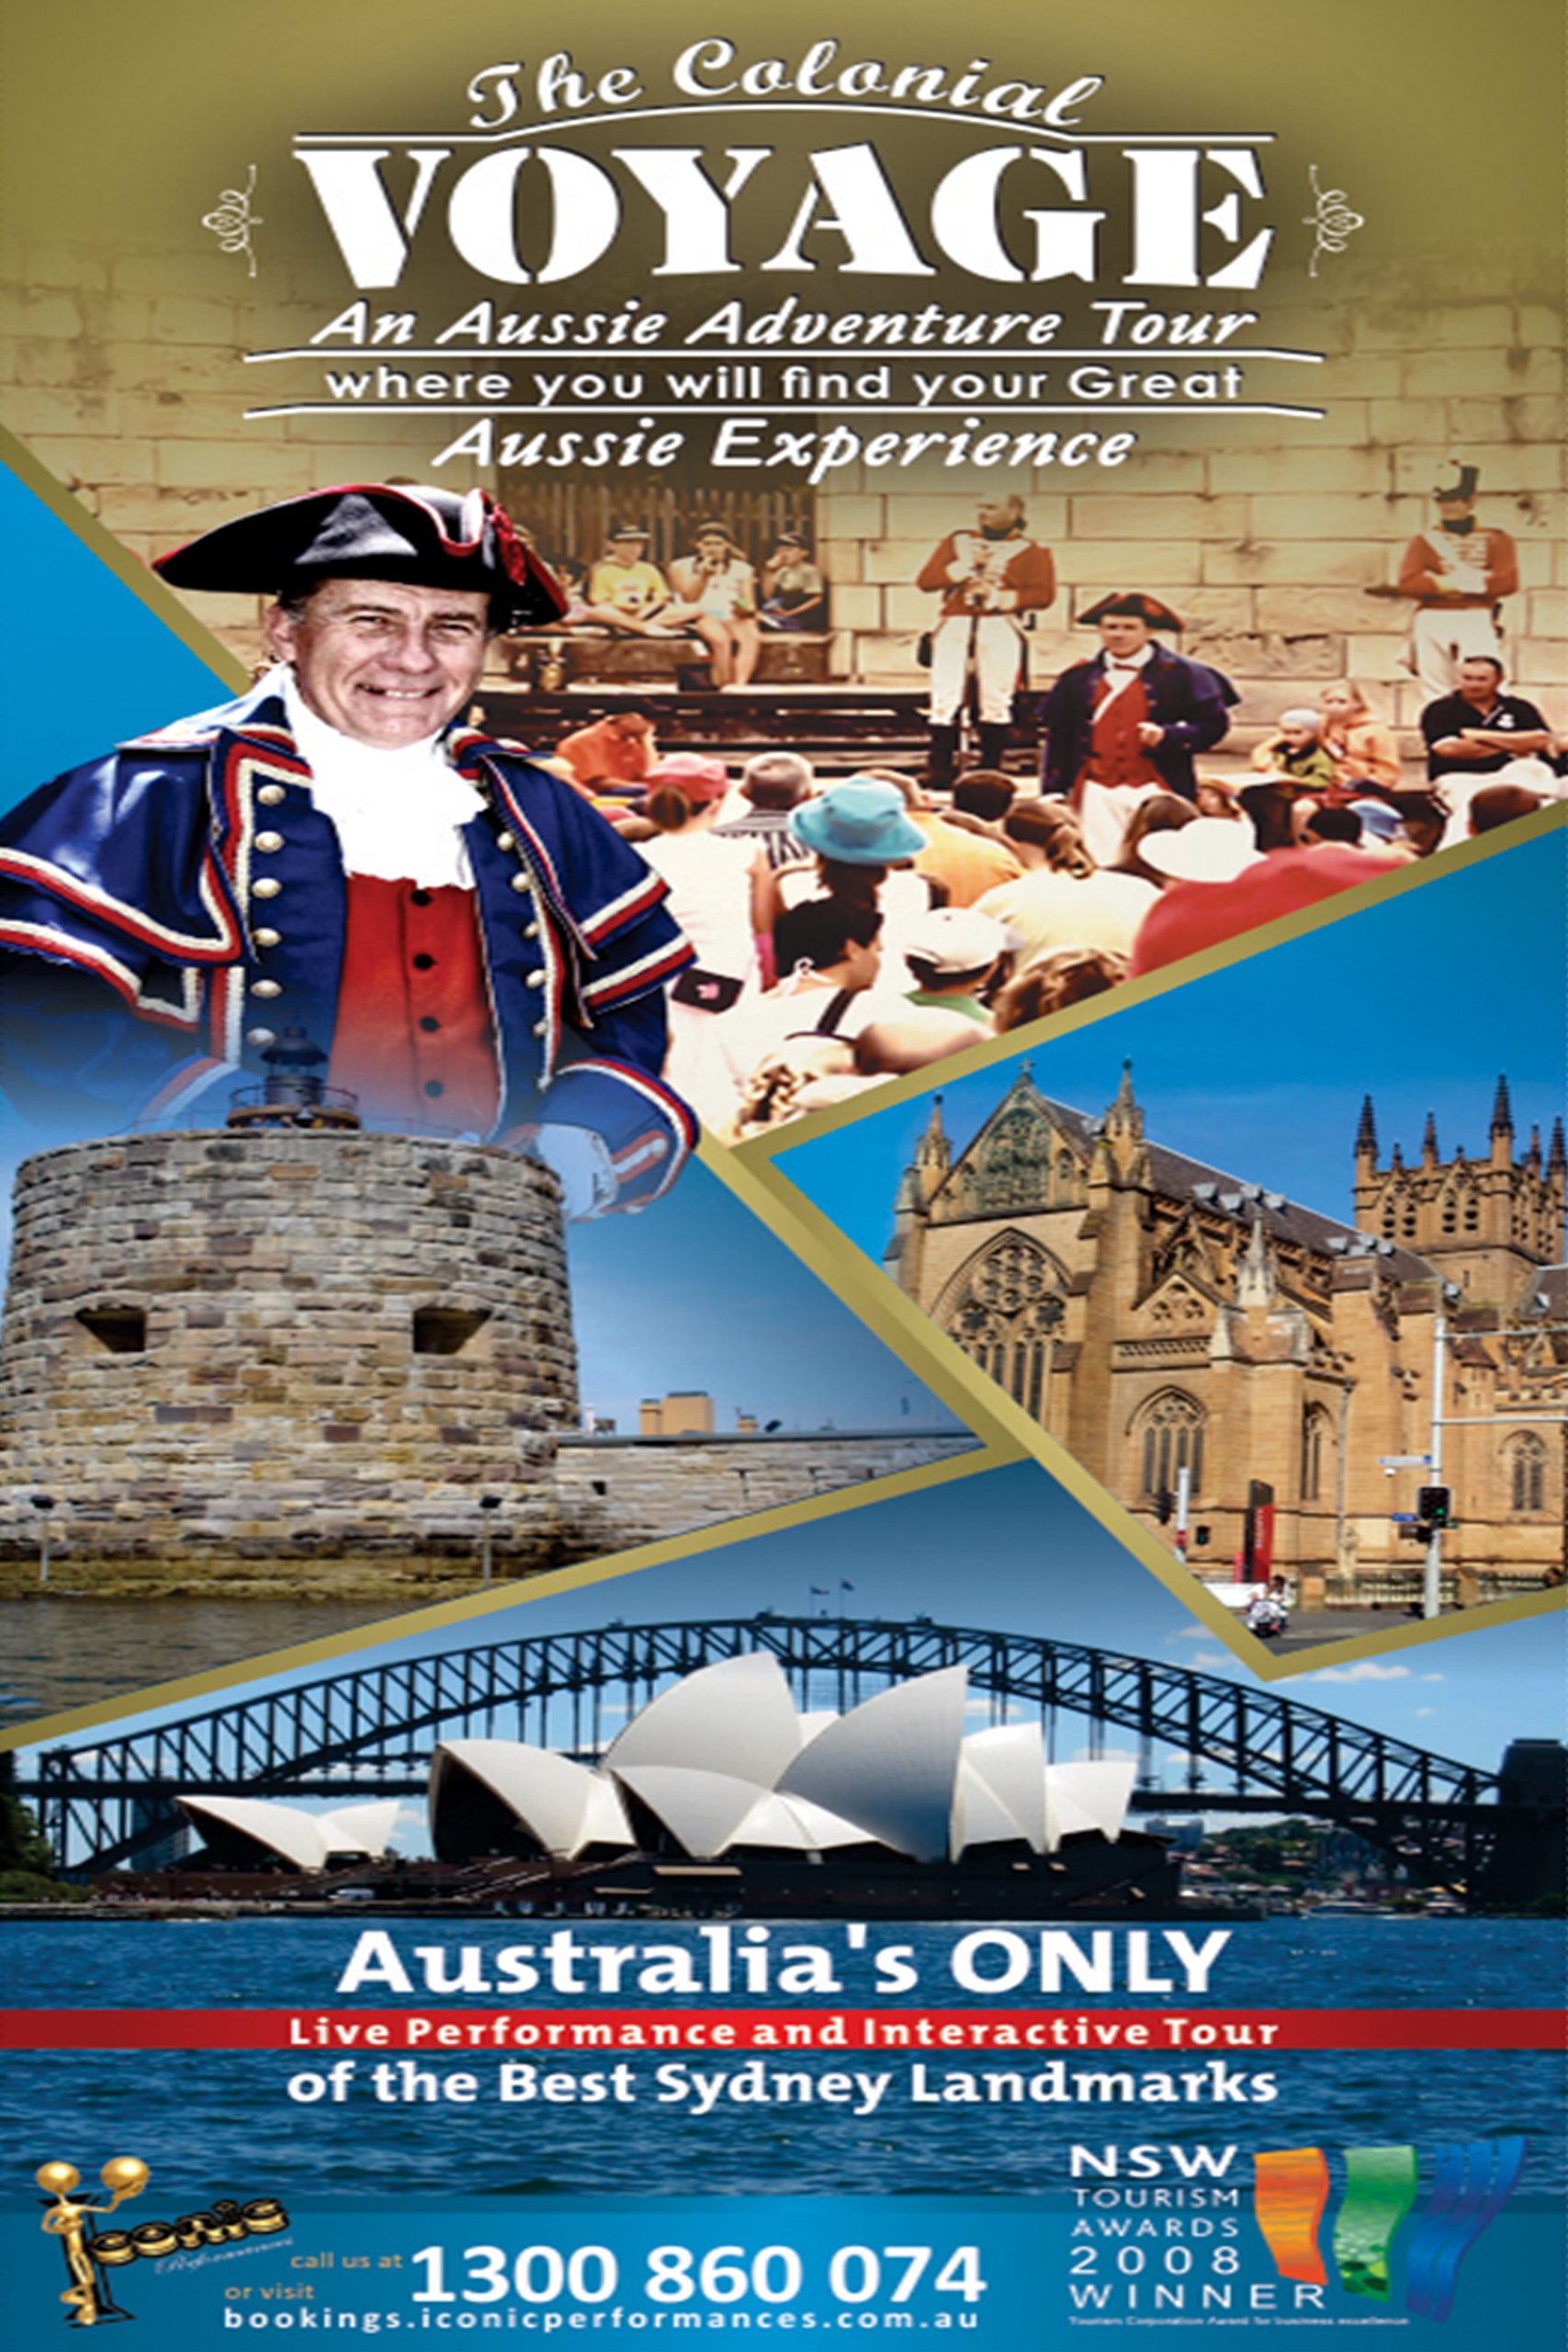 The Colonial Journey is an amazing BUS Trip Experience and Expedition Day Tour